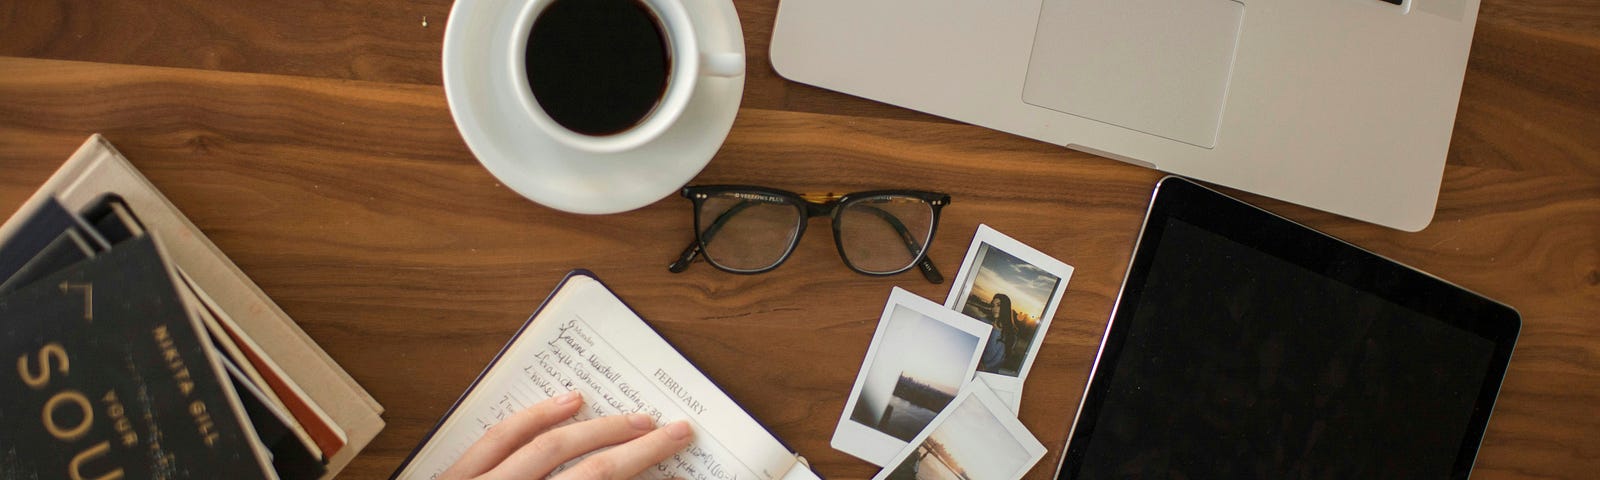 A desk with a laptop, coffee cup, glasses, books, and person writing in a journal.